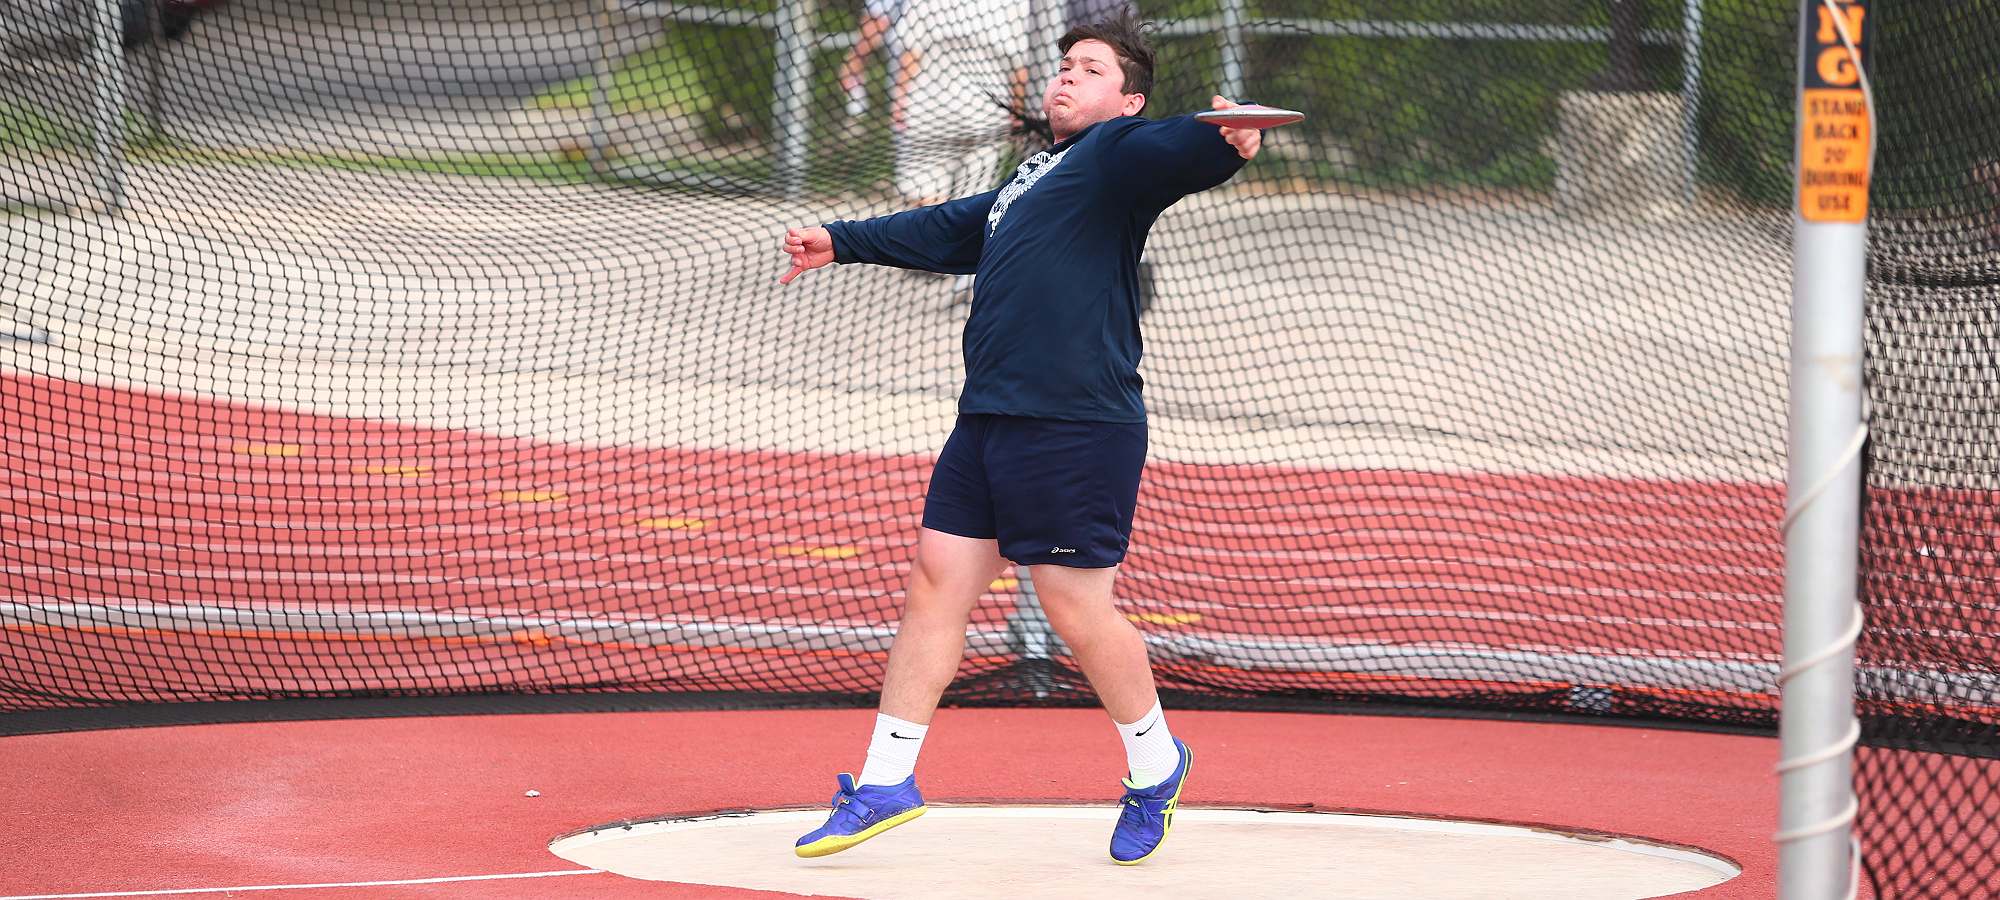 Carmona broke his own school record in the Hammer Throw on Friday at the SCAC Tournament.